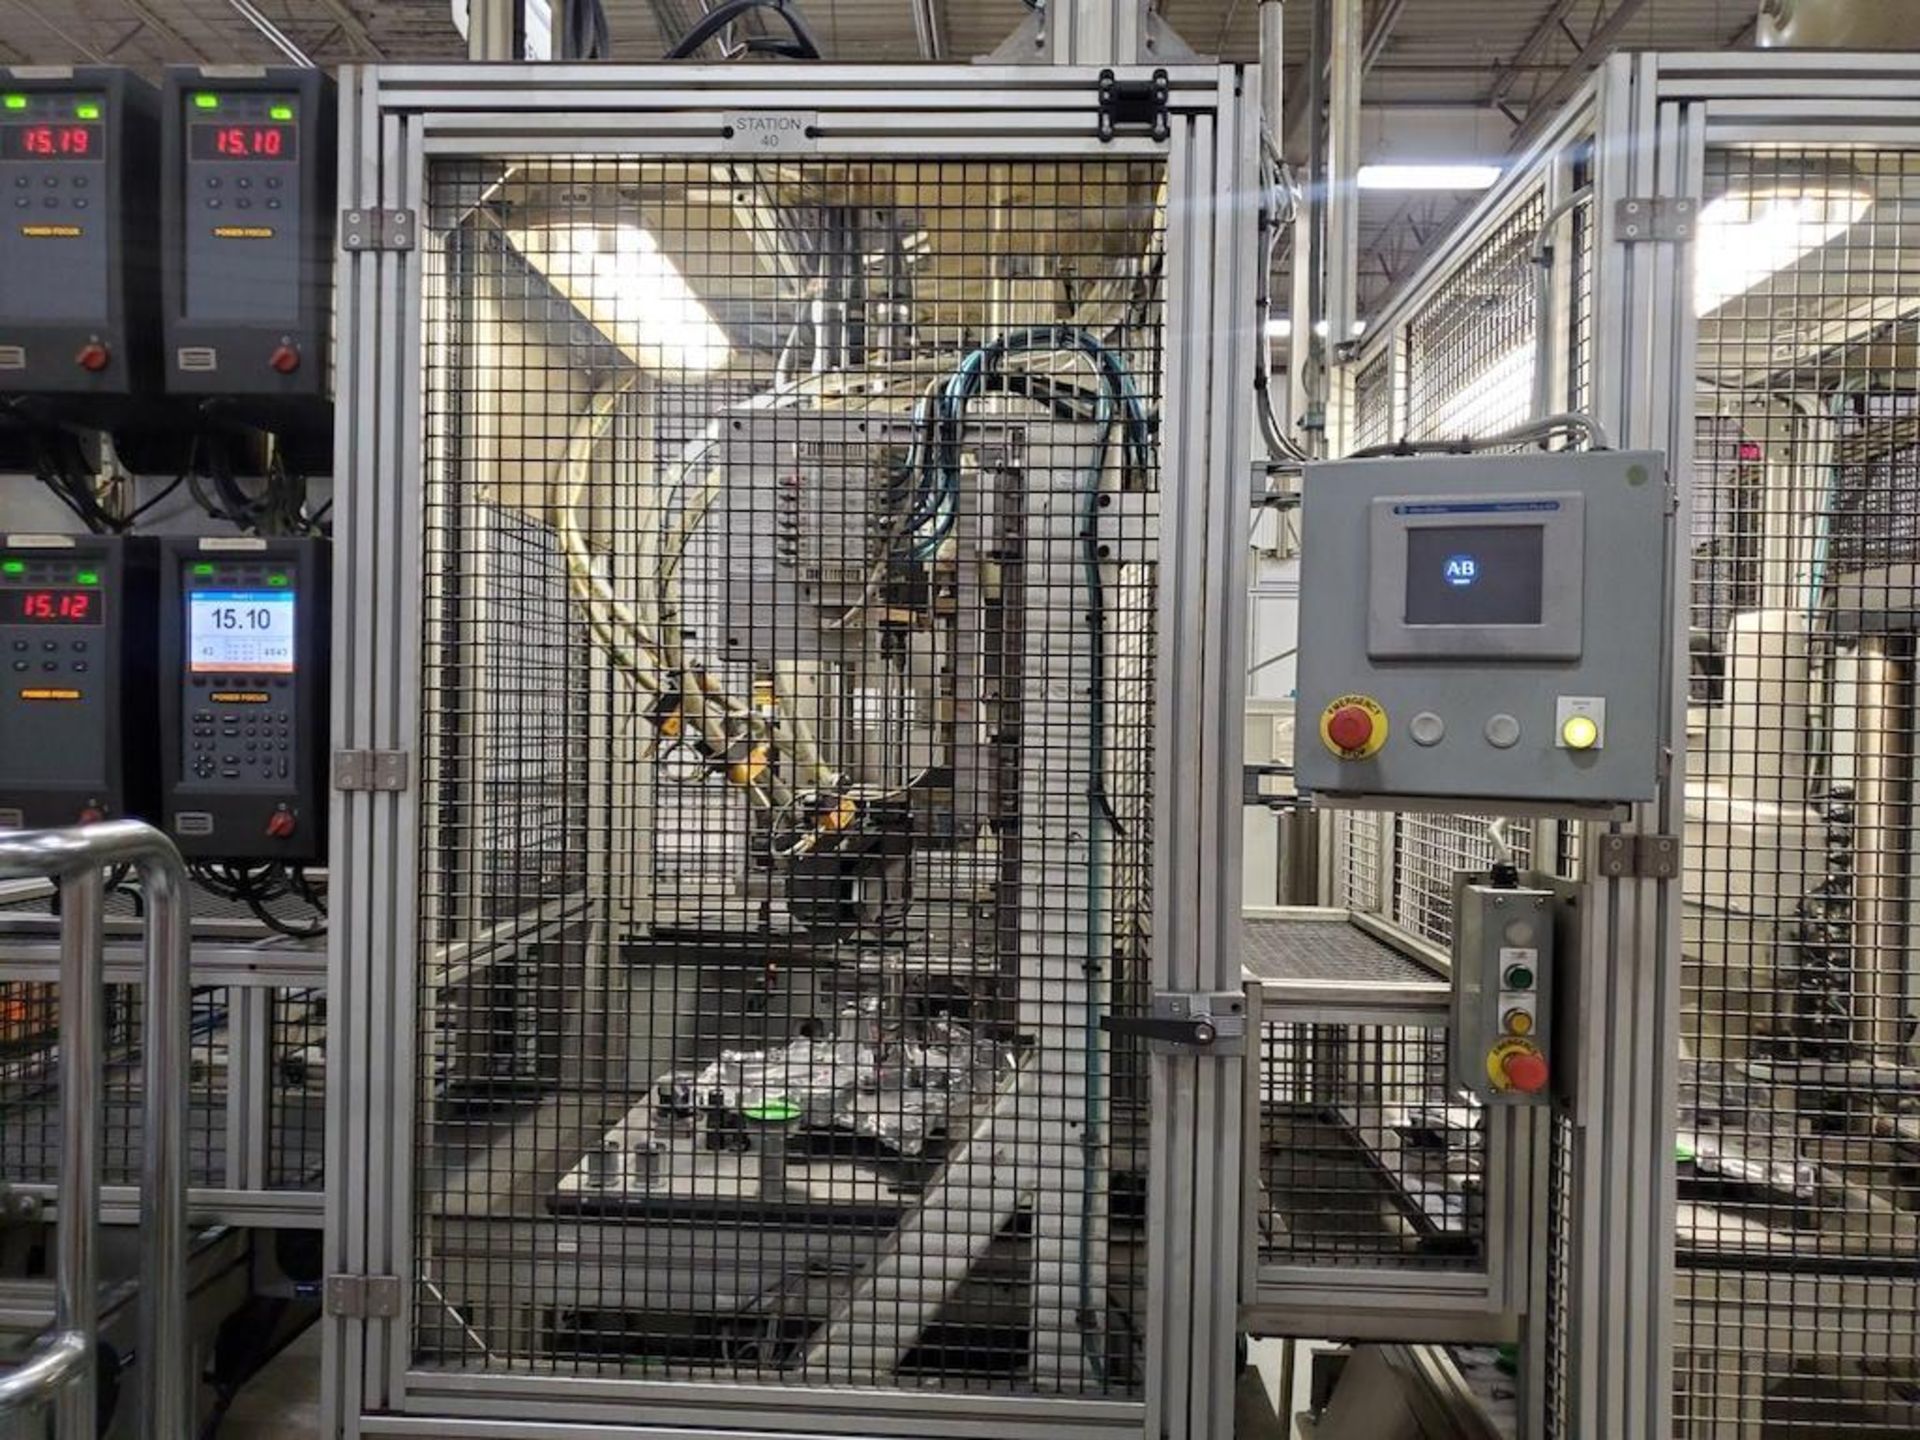 INNOVATIVE AUTOMATION FRONT COVER ASSEMBLY CELL INCLUDING 2014 OMRON ROBOT MODEL COBRA S800, SN'S - Image 8 of 8